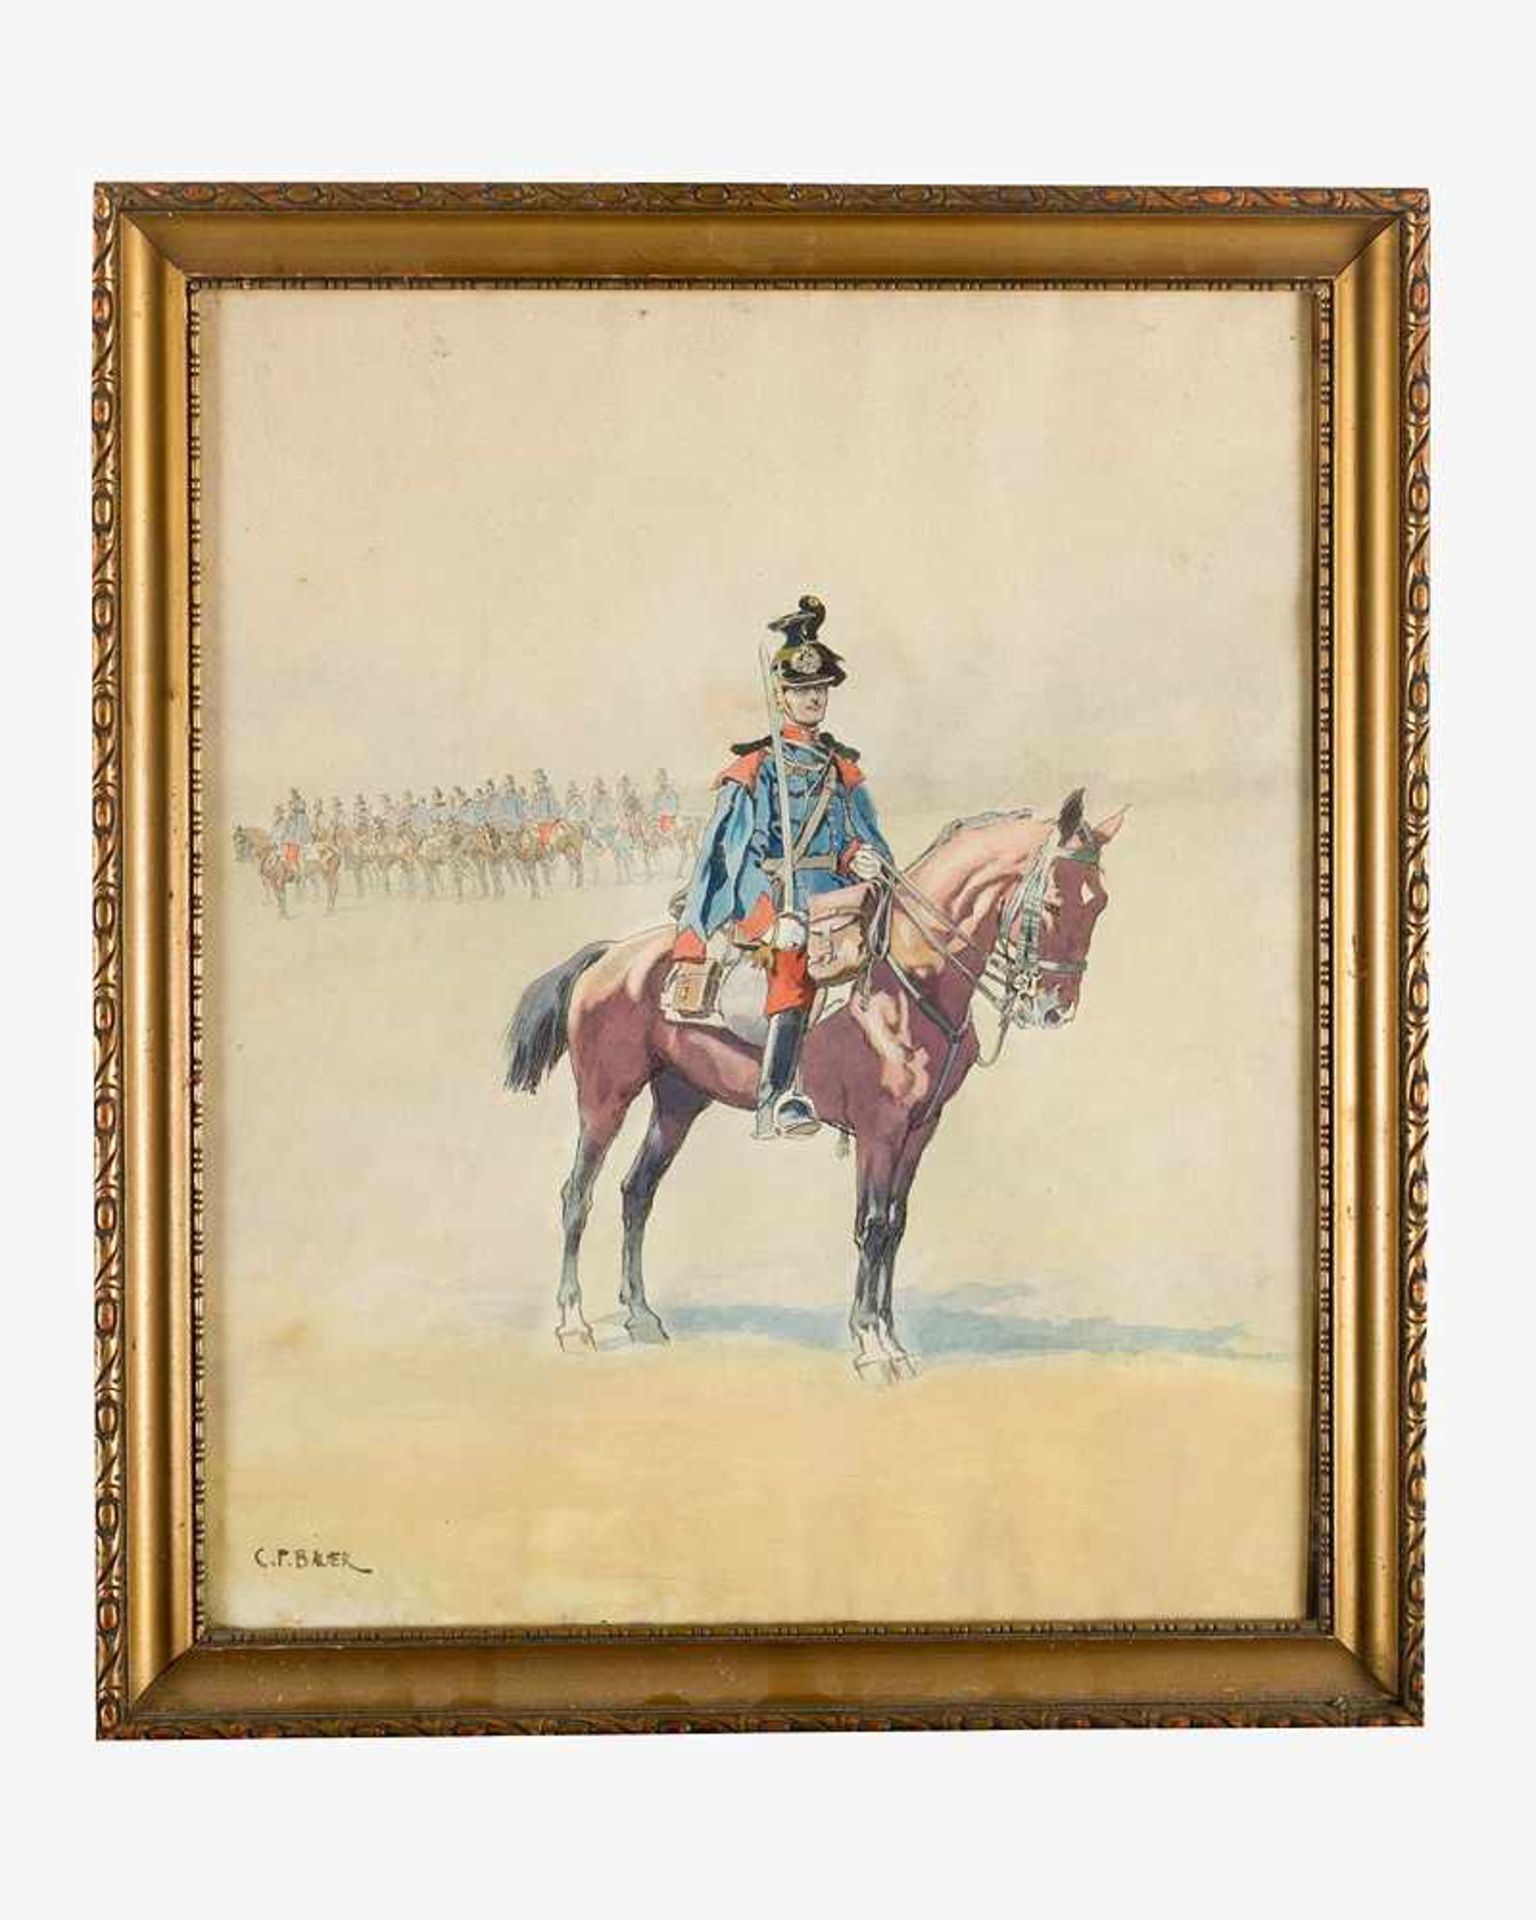 Carl Franz Bauer (1879-1954)-attributed, Austrian cavalry, mixed technique with watercolour on